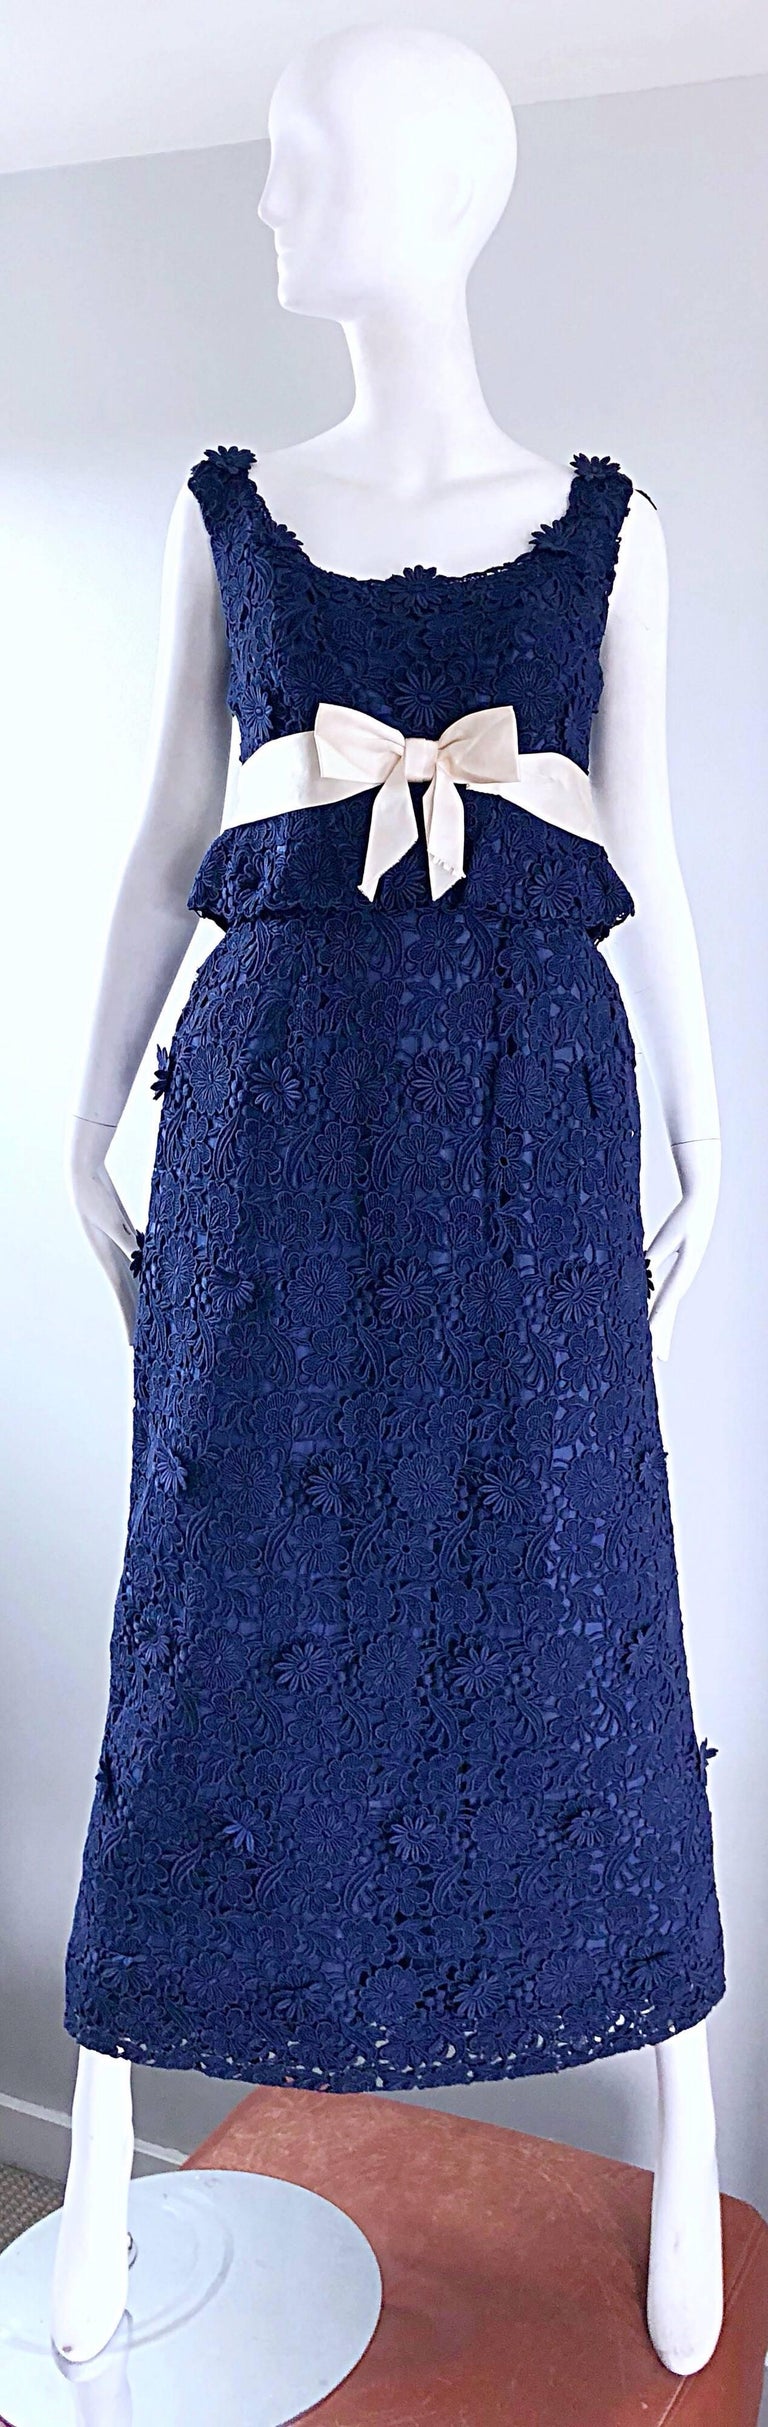 Stunning 1960s BOB BUGNAND Couture navy blue crochet lace full length evening dress! Features a fitted bodice with a forgiving and flattering bell shaped skirt. Attached ivory silk bow belt has hidden hook-and-eye closure on the back. Full metal